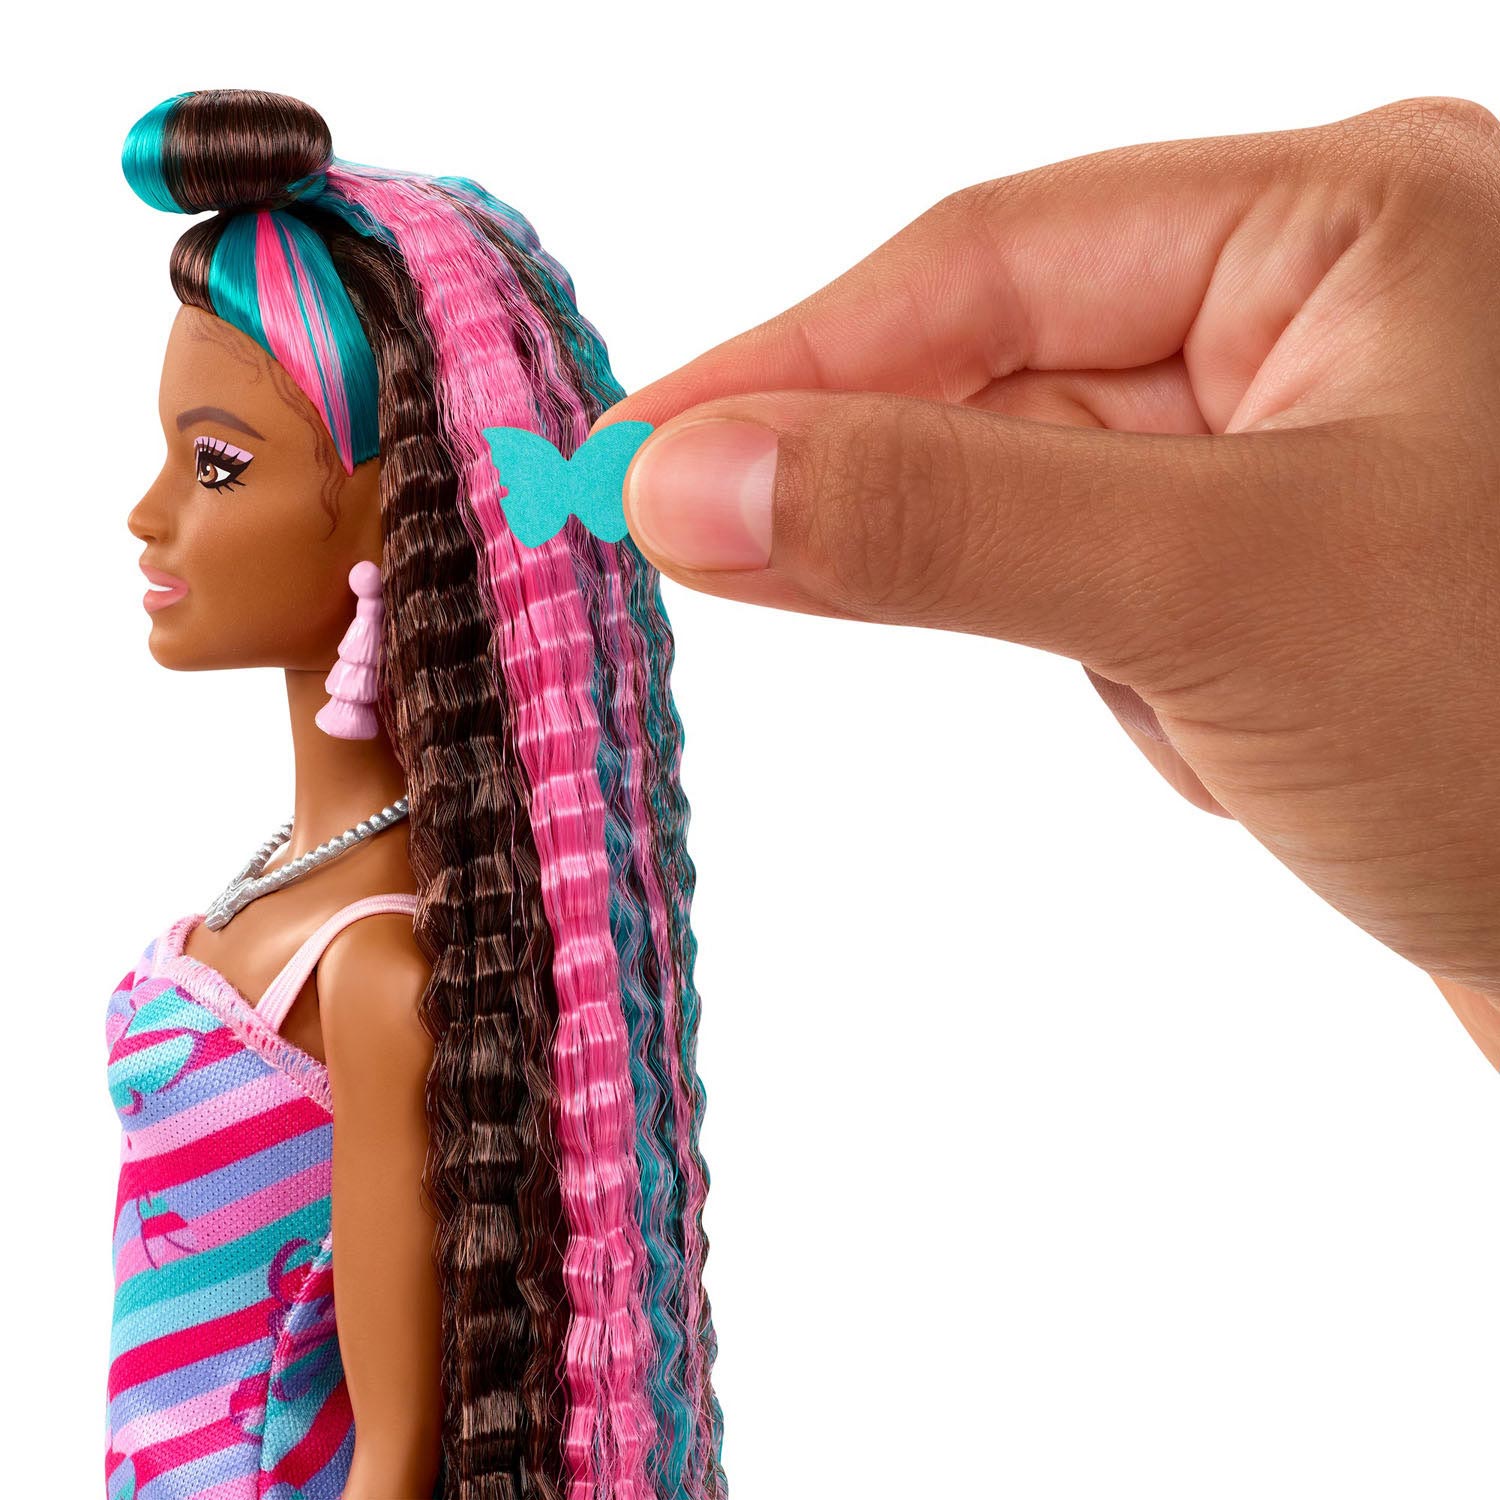 Barbie Pop Totally Hair - Butterfly